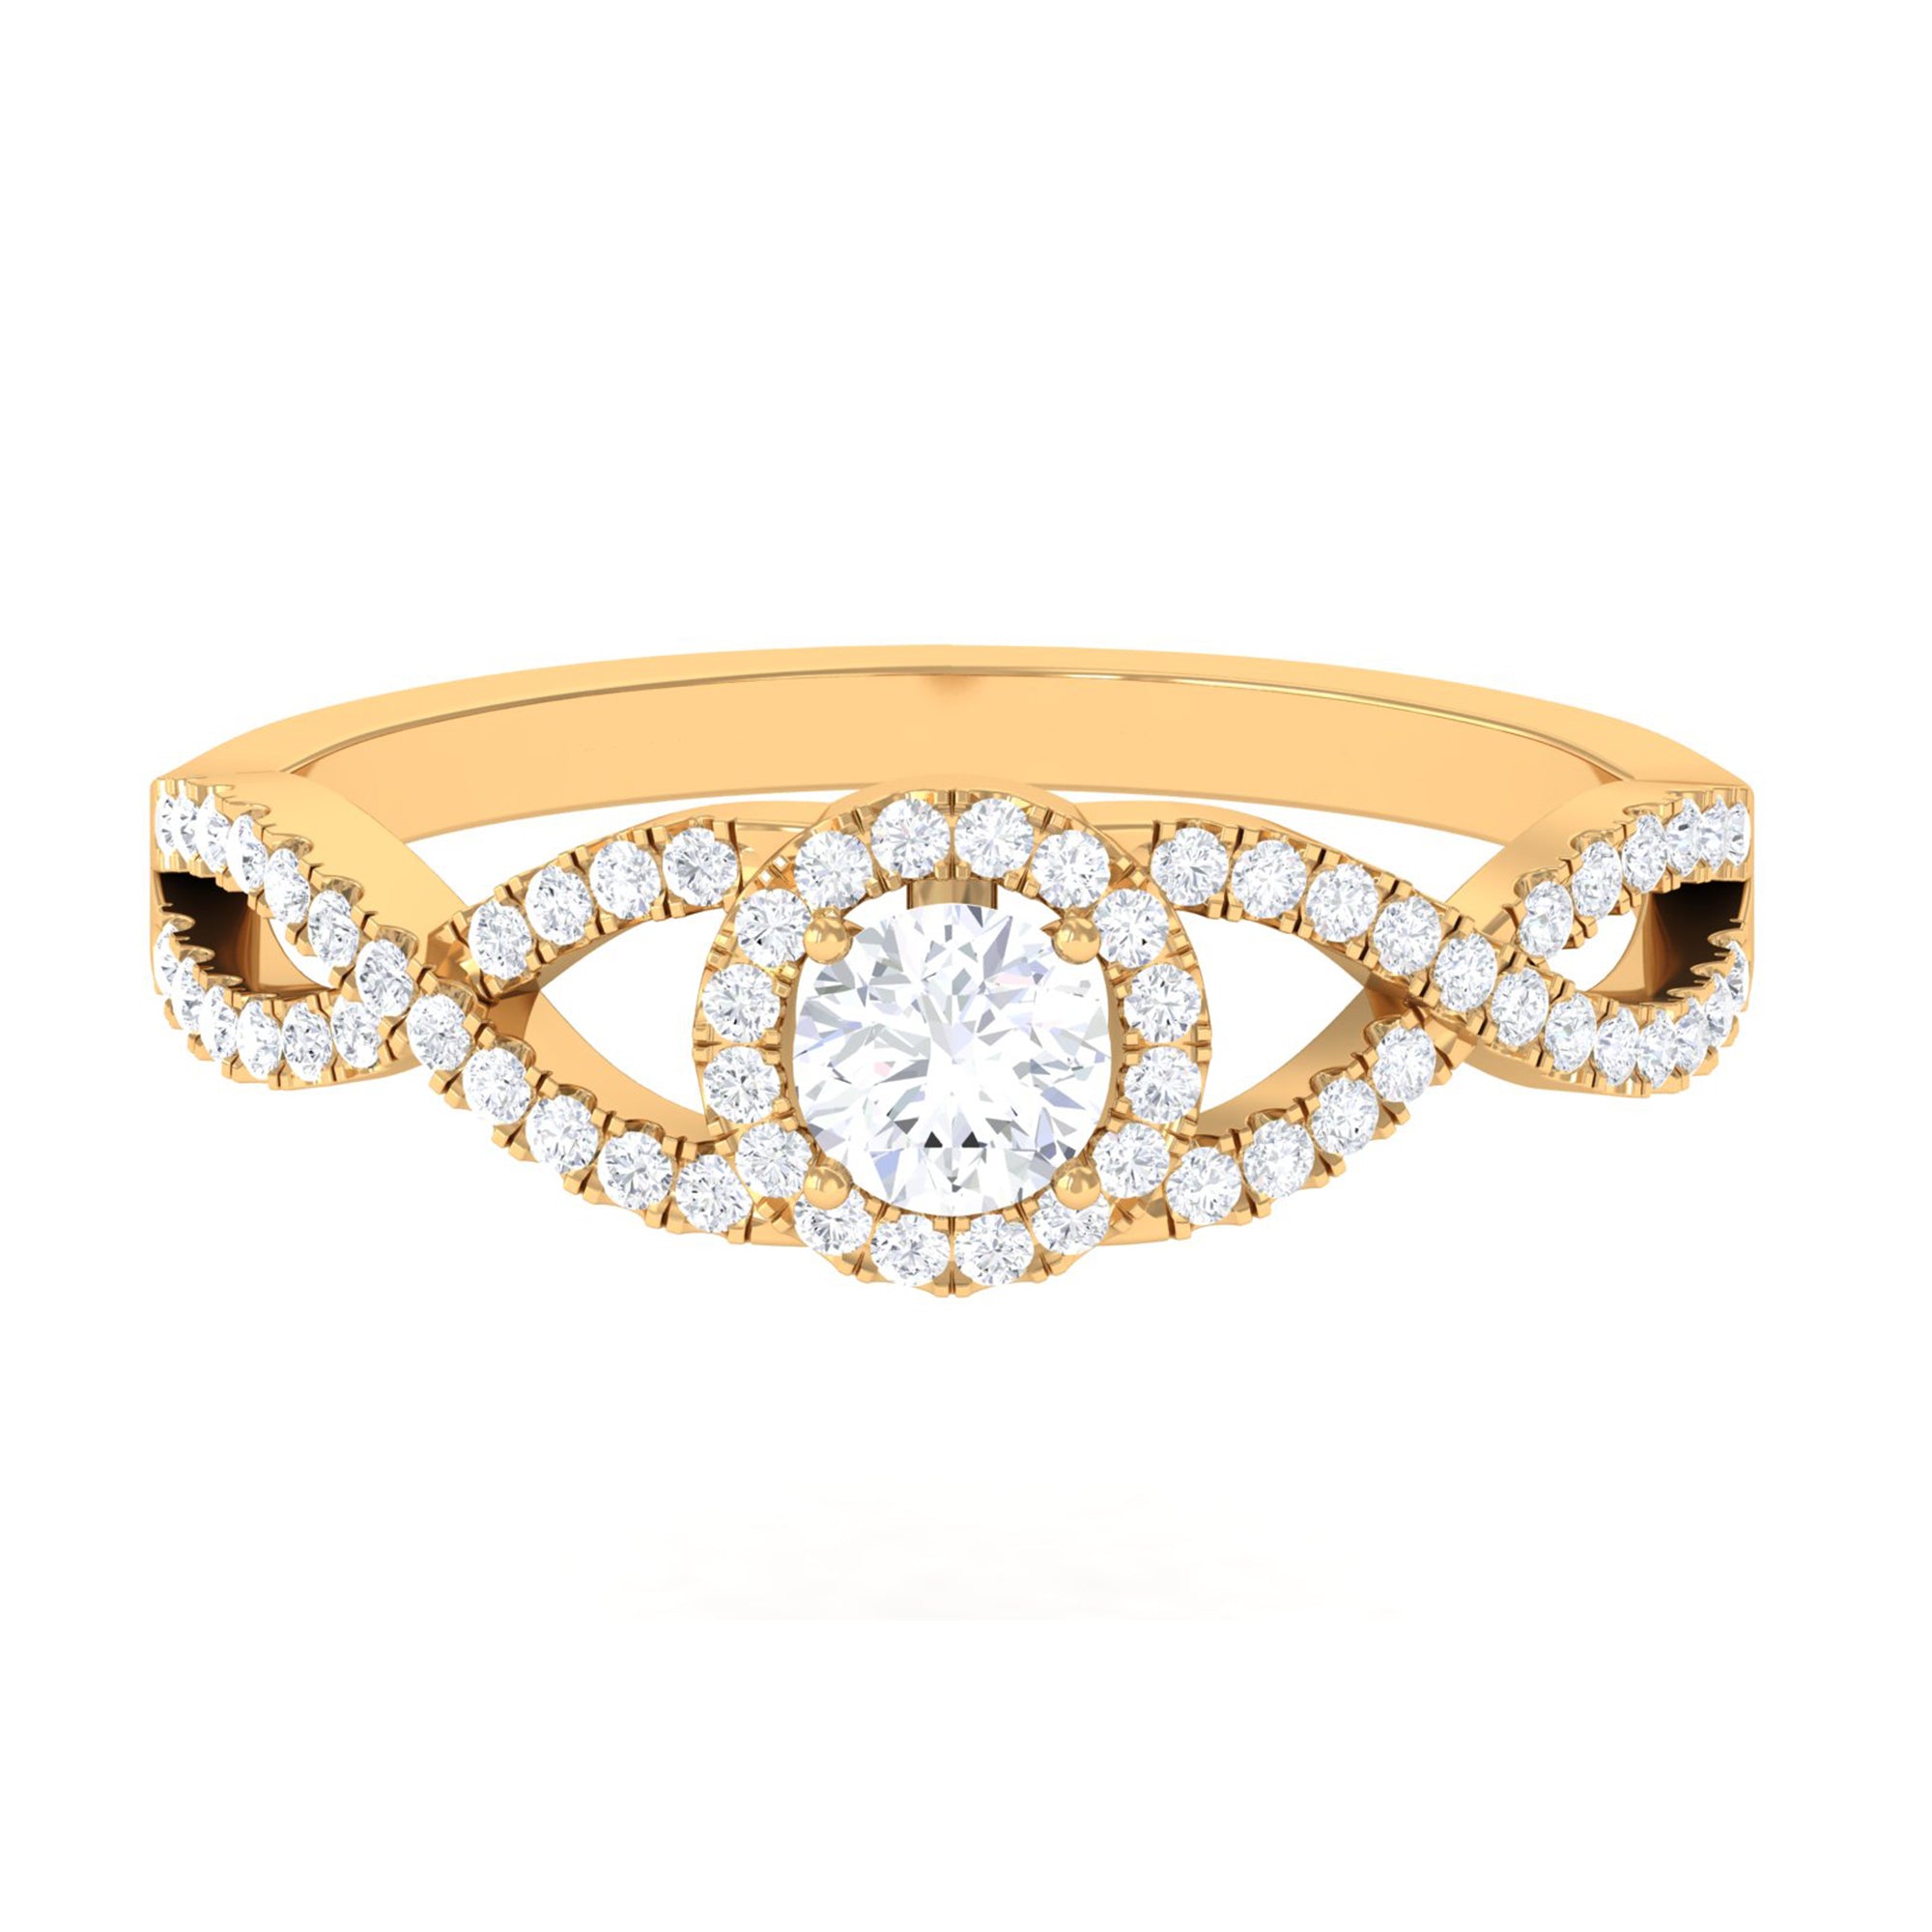 Round Shape Moissanite Crossover Engagement Ring in Gold Moissanite - ( D-VS1 ) - Color and Clarity - Rosec Jewels